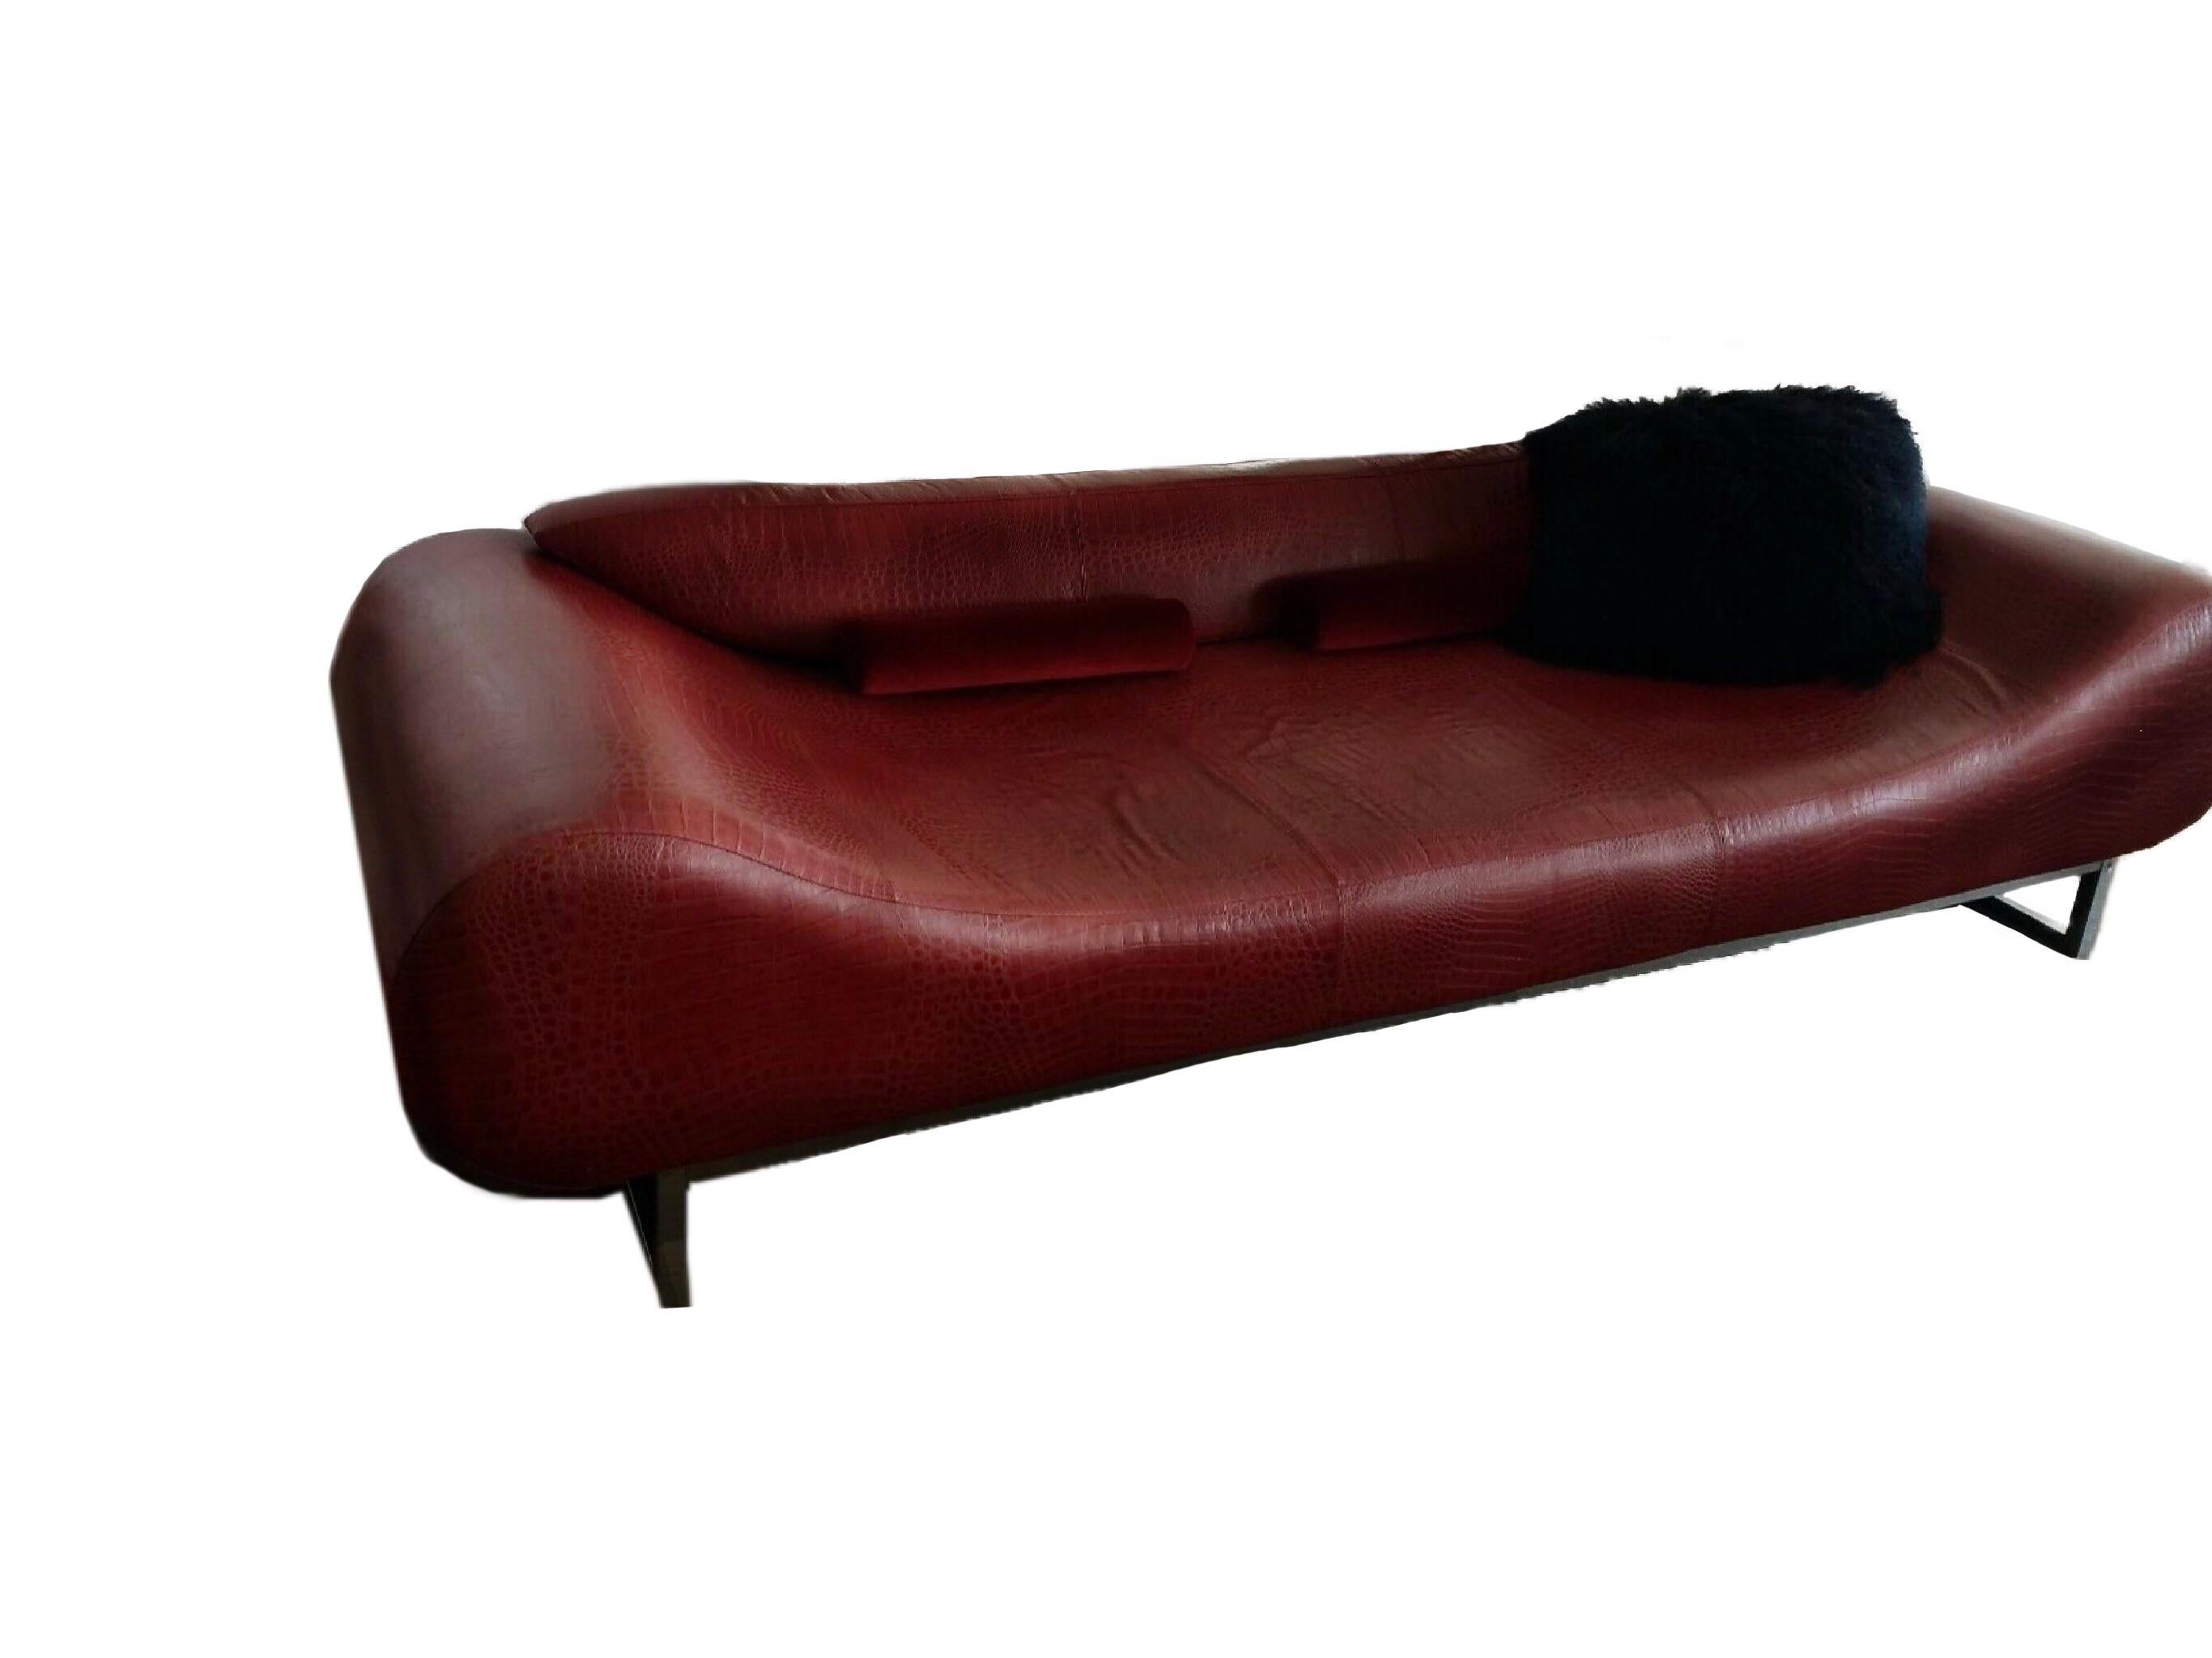 Fendi deep red chestnut leather organic modern ‘Eros’ Sofa, debuted in 2004.

Fendi casa Eros sofa with steel sleigh legs, adjustable back cushion, embossed pattern at upholstery and brand plaque at lower edge of arm.

MSRP 32,400 USD.